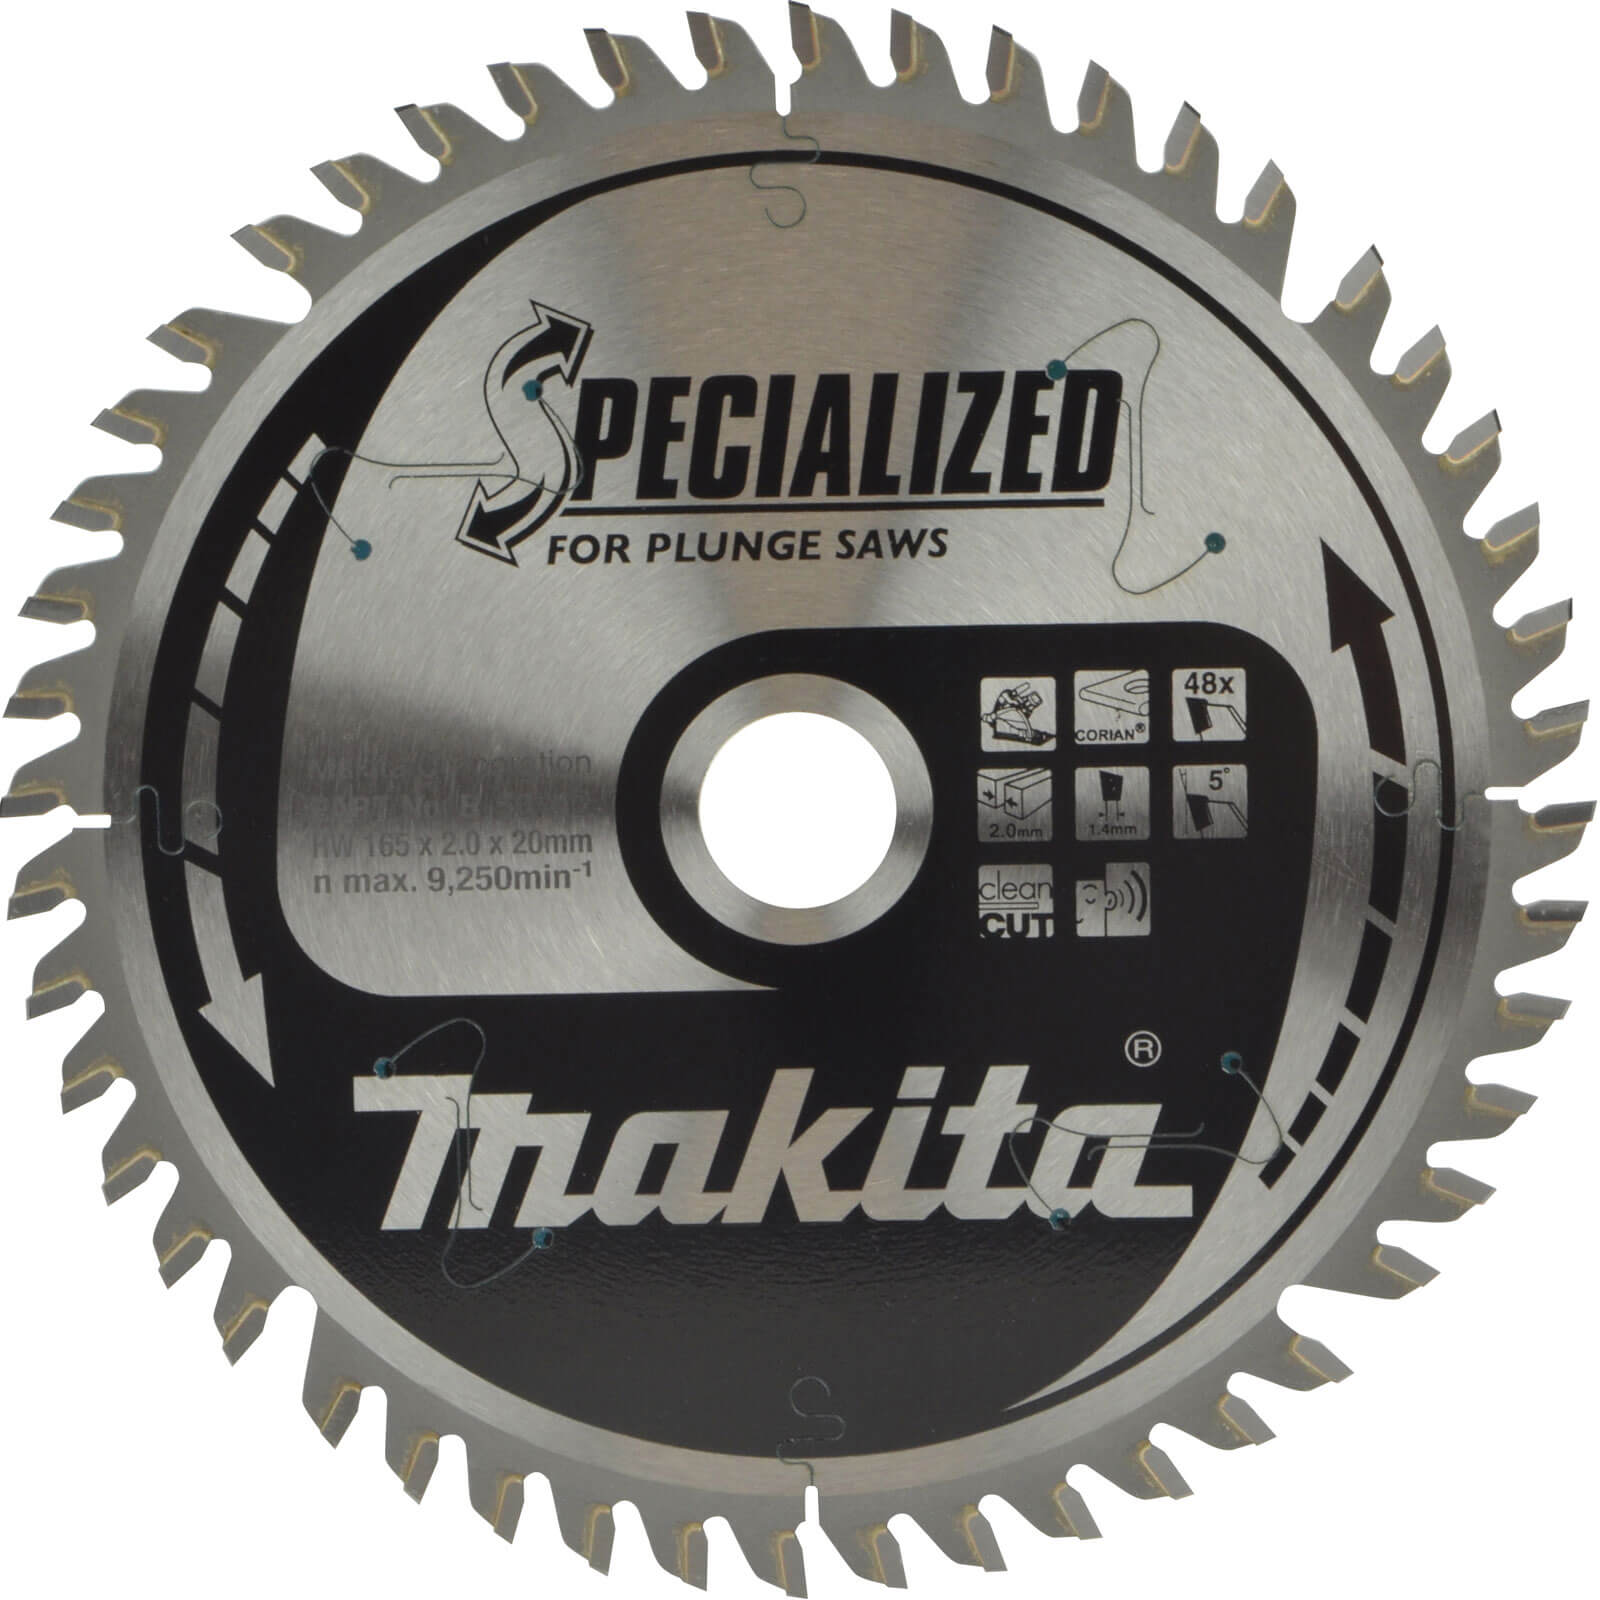 Image of Makita SPECIALIZED Plunge Saw Corian Cutting Saw Blade 165mm 48T 20mm